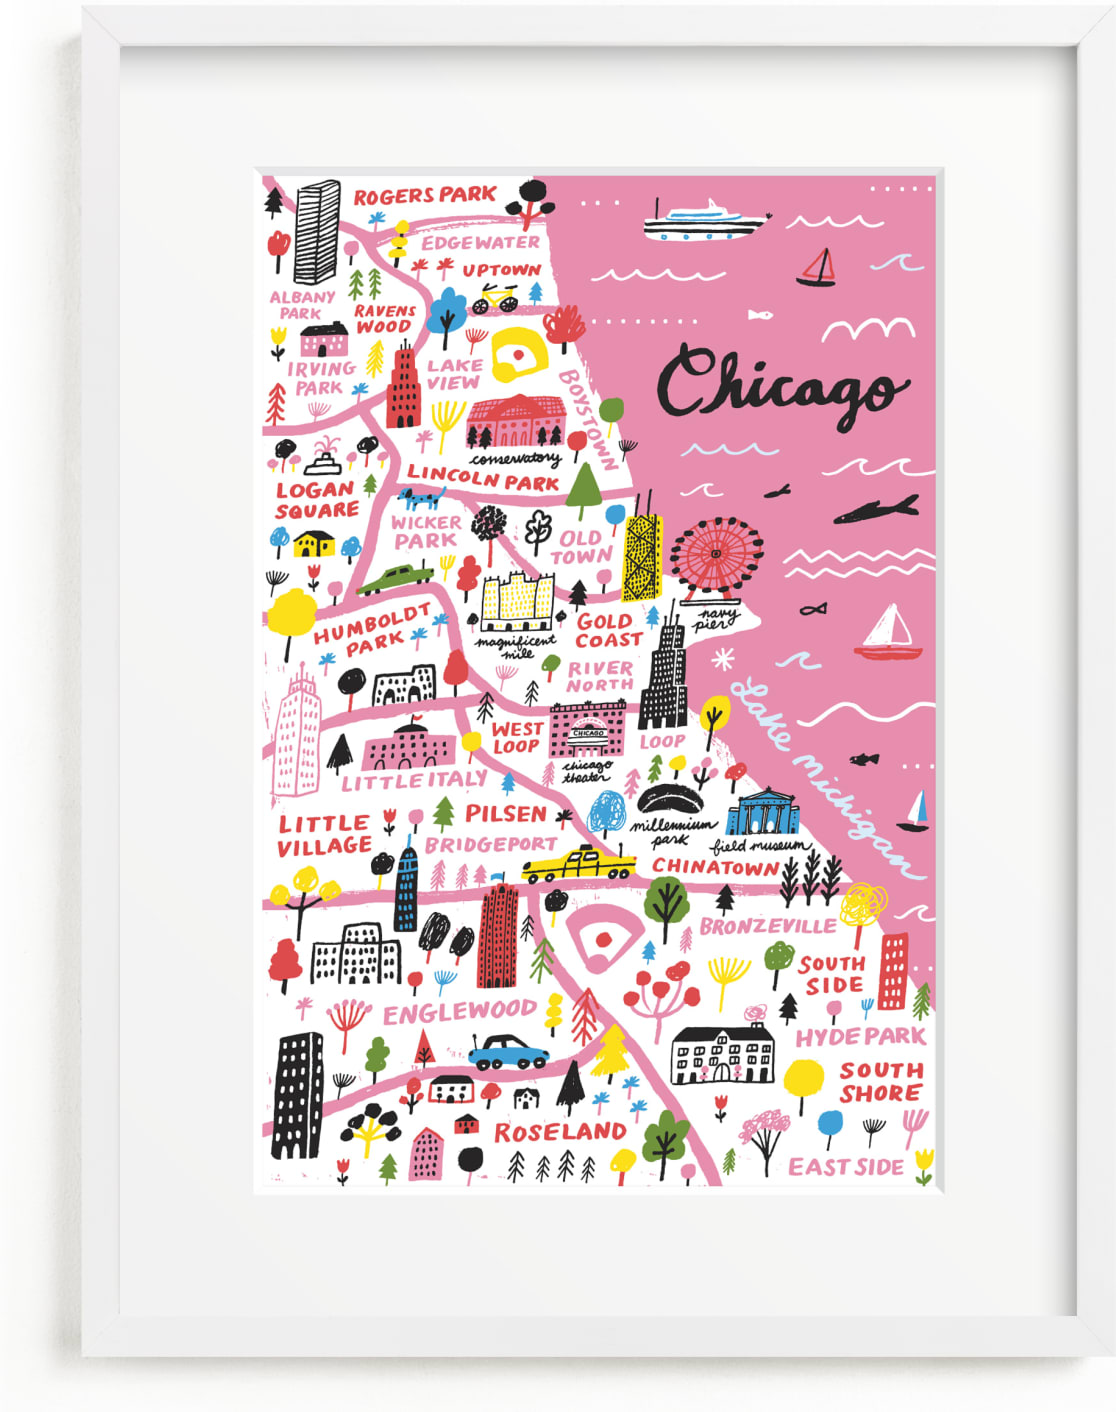 This is a colorful art by Jordan Sondler called I Love Chicago.